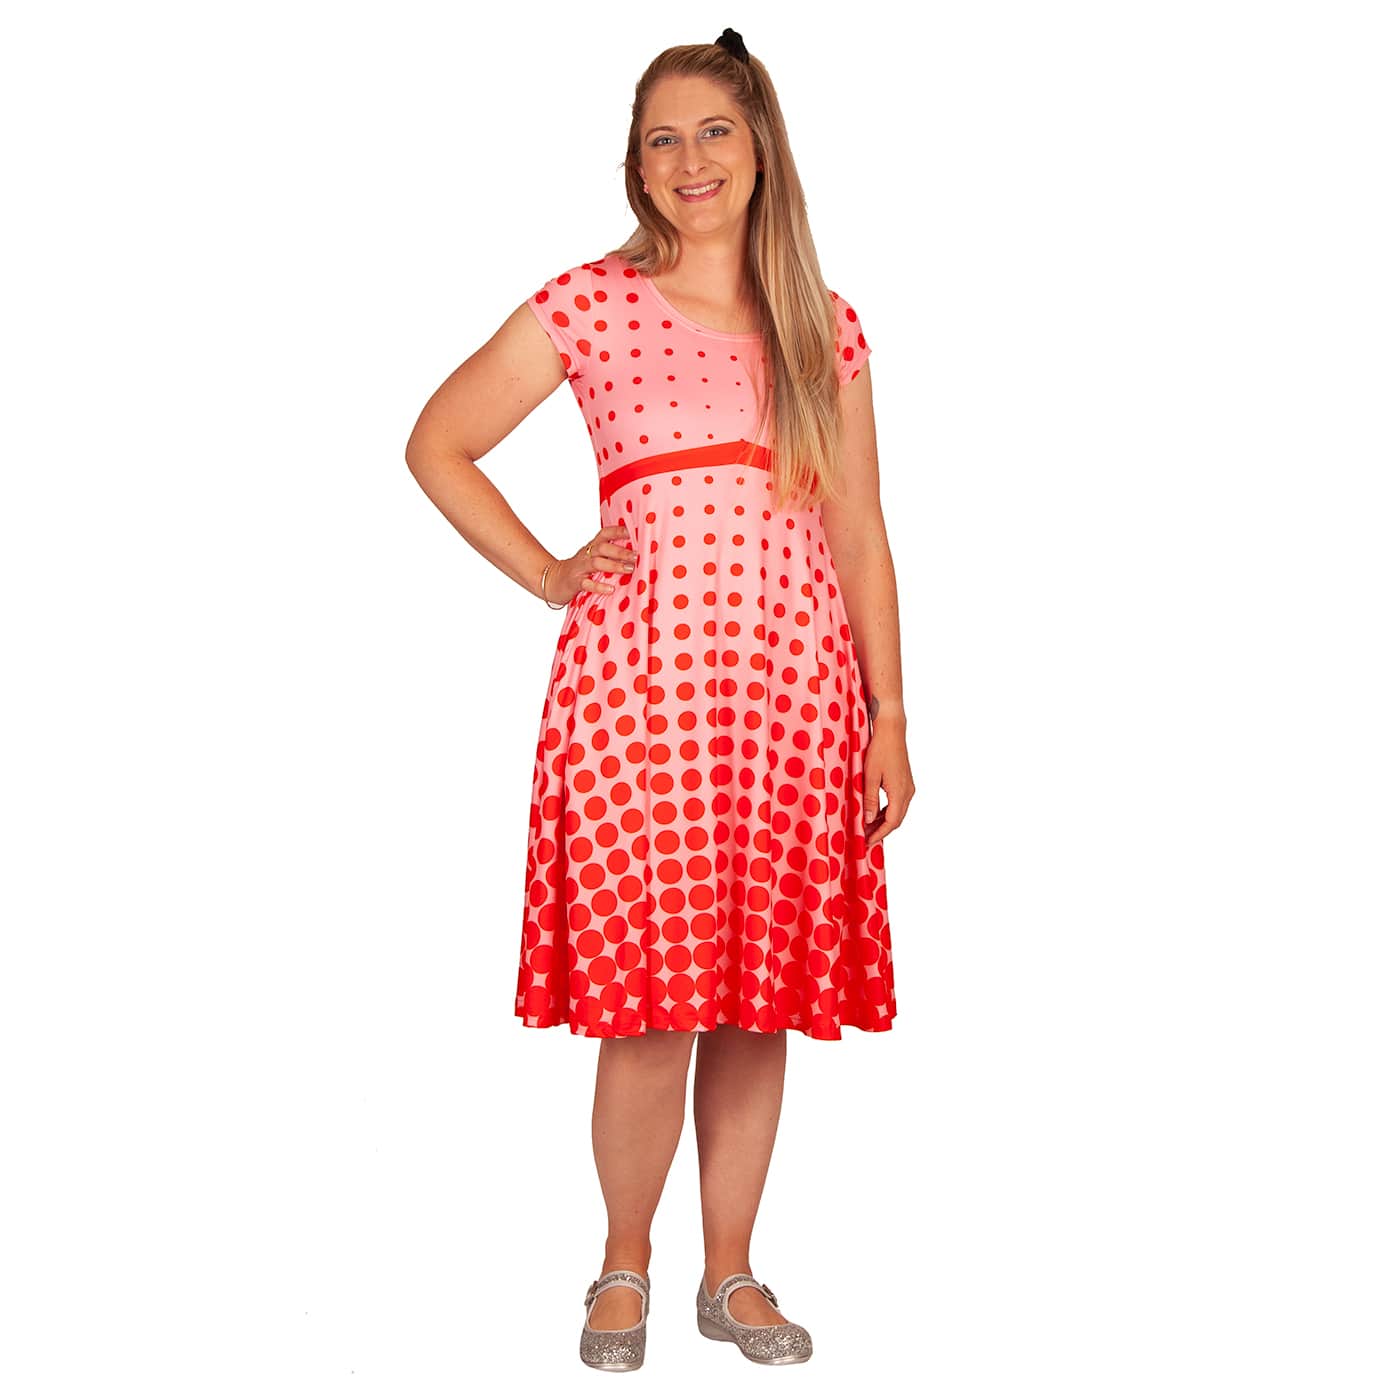 Blush Tea Dress by RainbowsAndFairies.com (Red Pink - Polka Dot - Psychedelic - Dress With Pockets - Pin Up - Rockabilly - Rock & Roll) - SKU: CL_TEADR_BLUSH_ORG - Pic 07